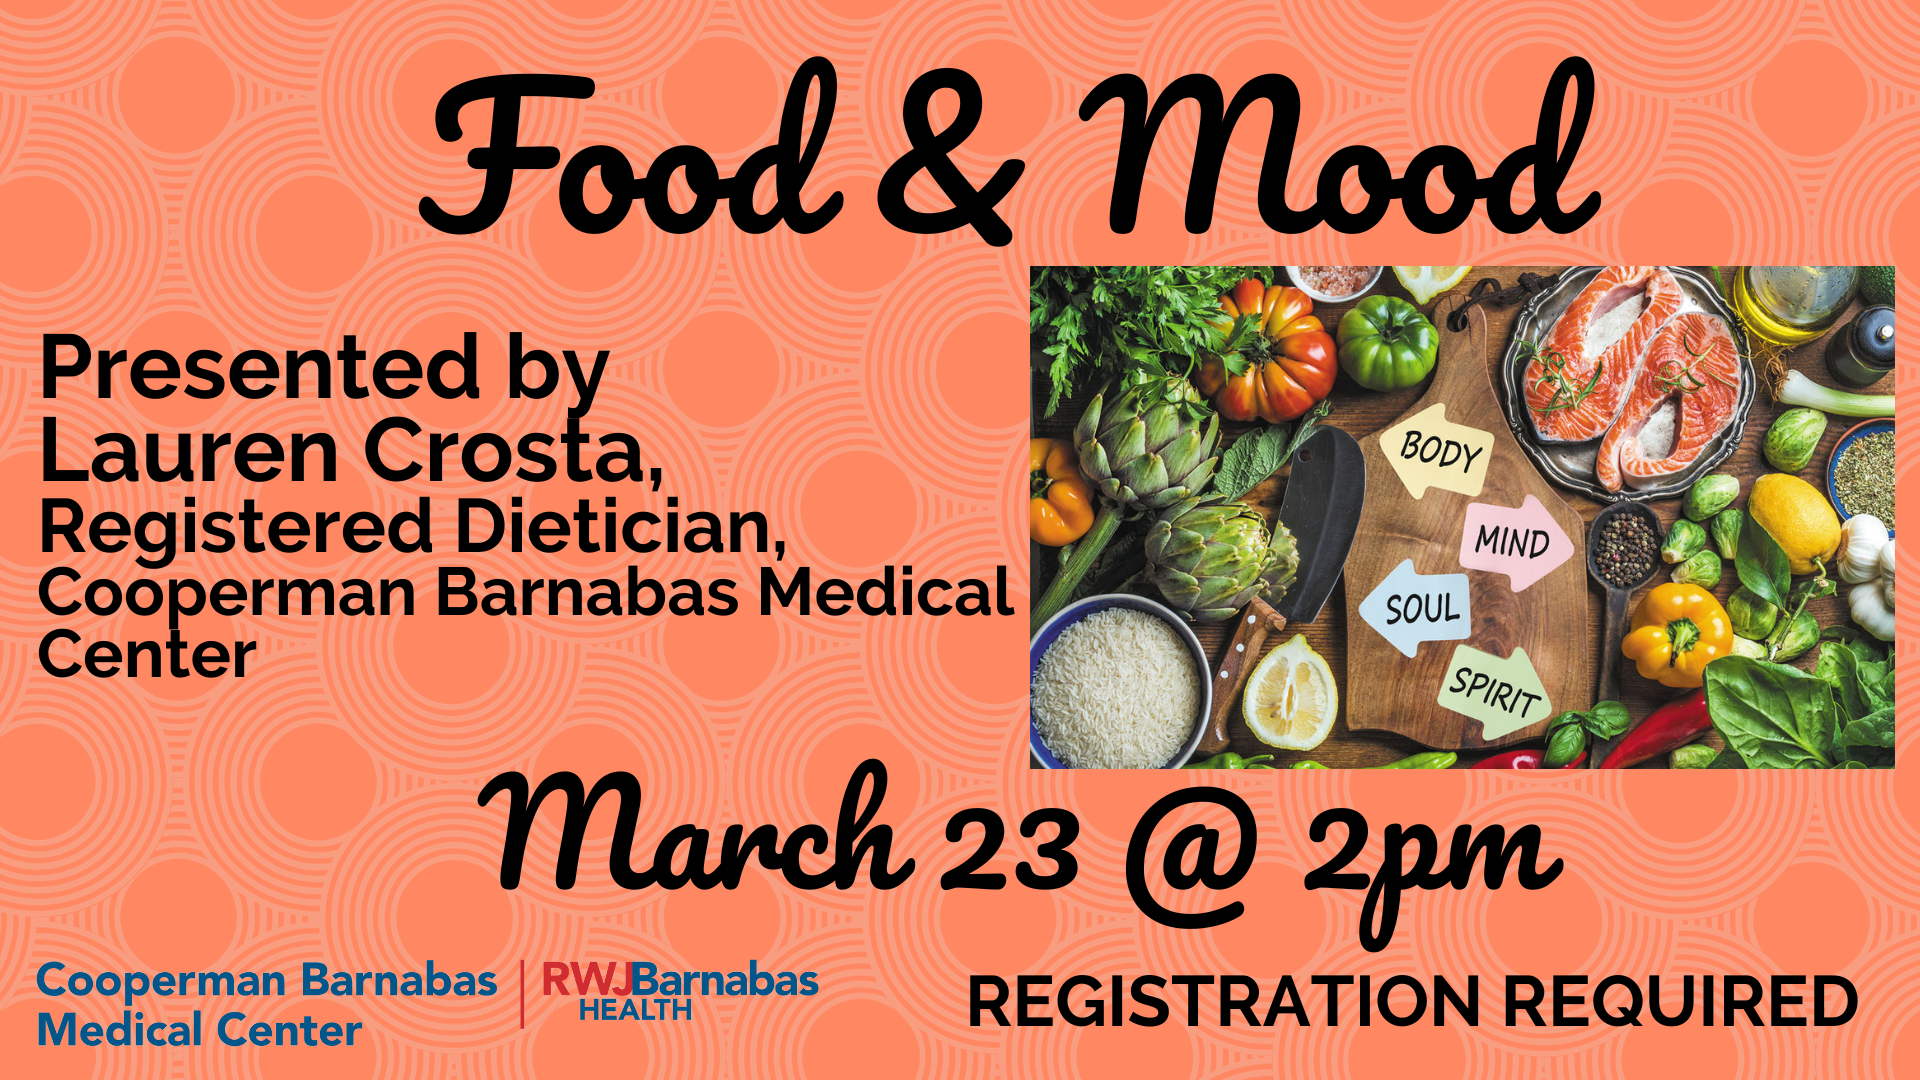 Food and Mood with Barnabas Cooperman Medical Center